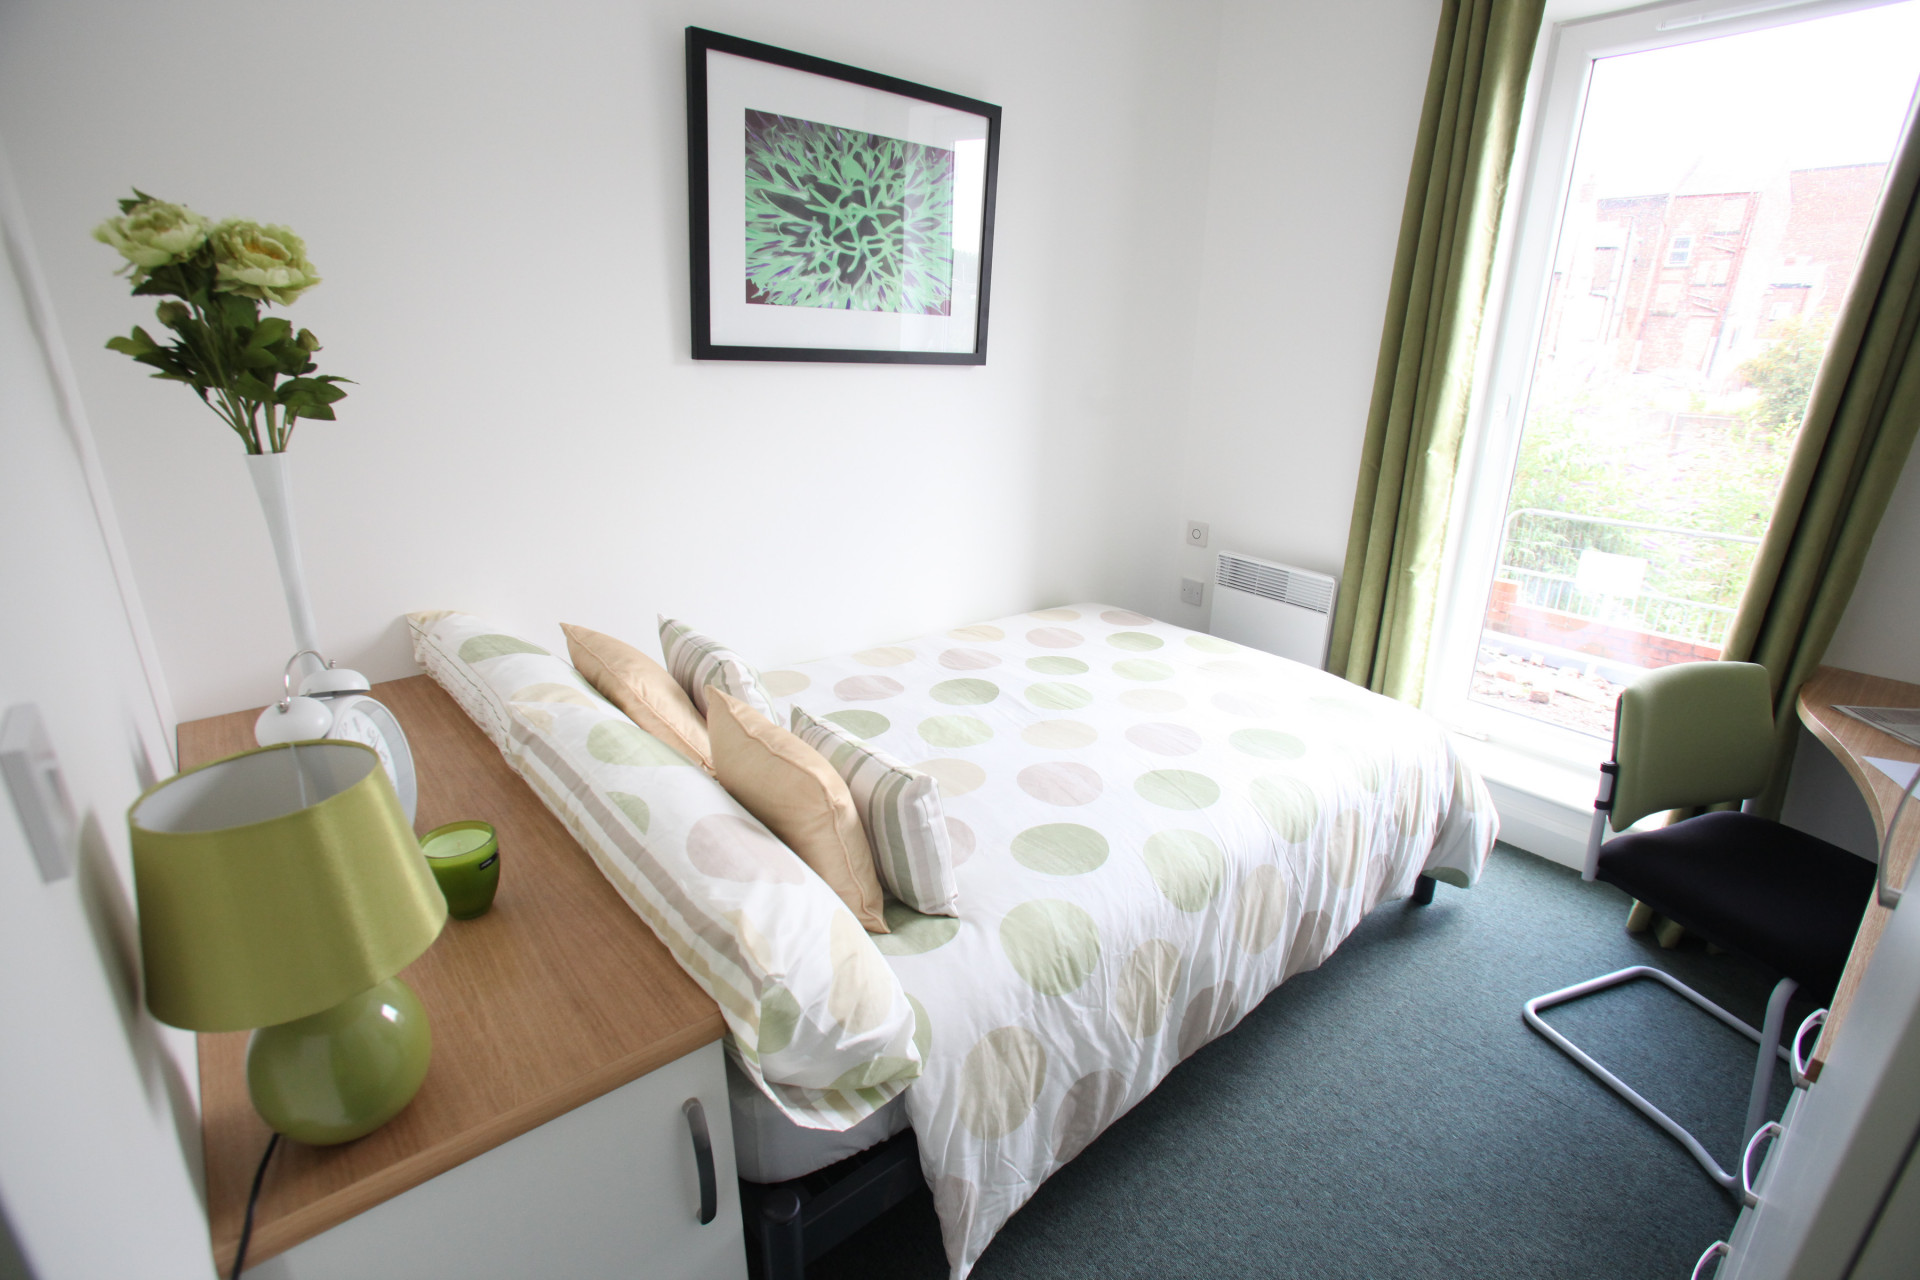 1 Room Flat to rent. Apartments (from private landlords) for students. Flat sharing. Share a flat